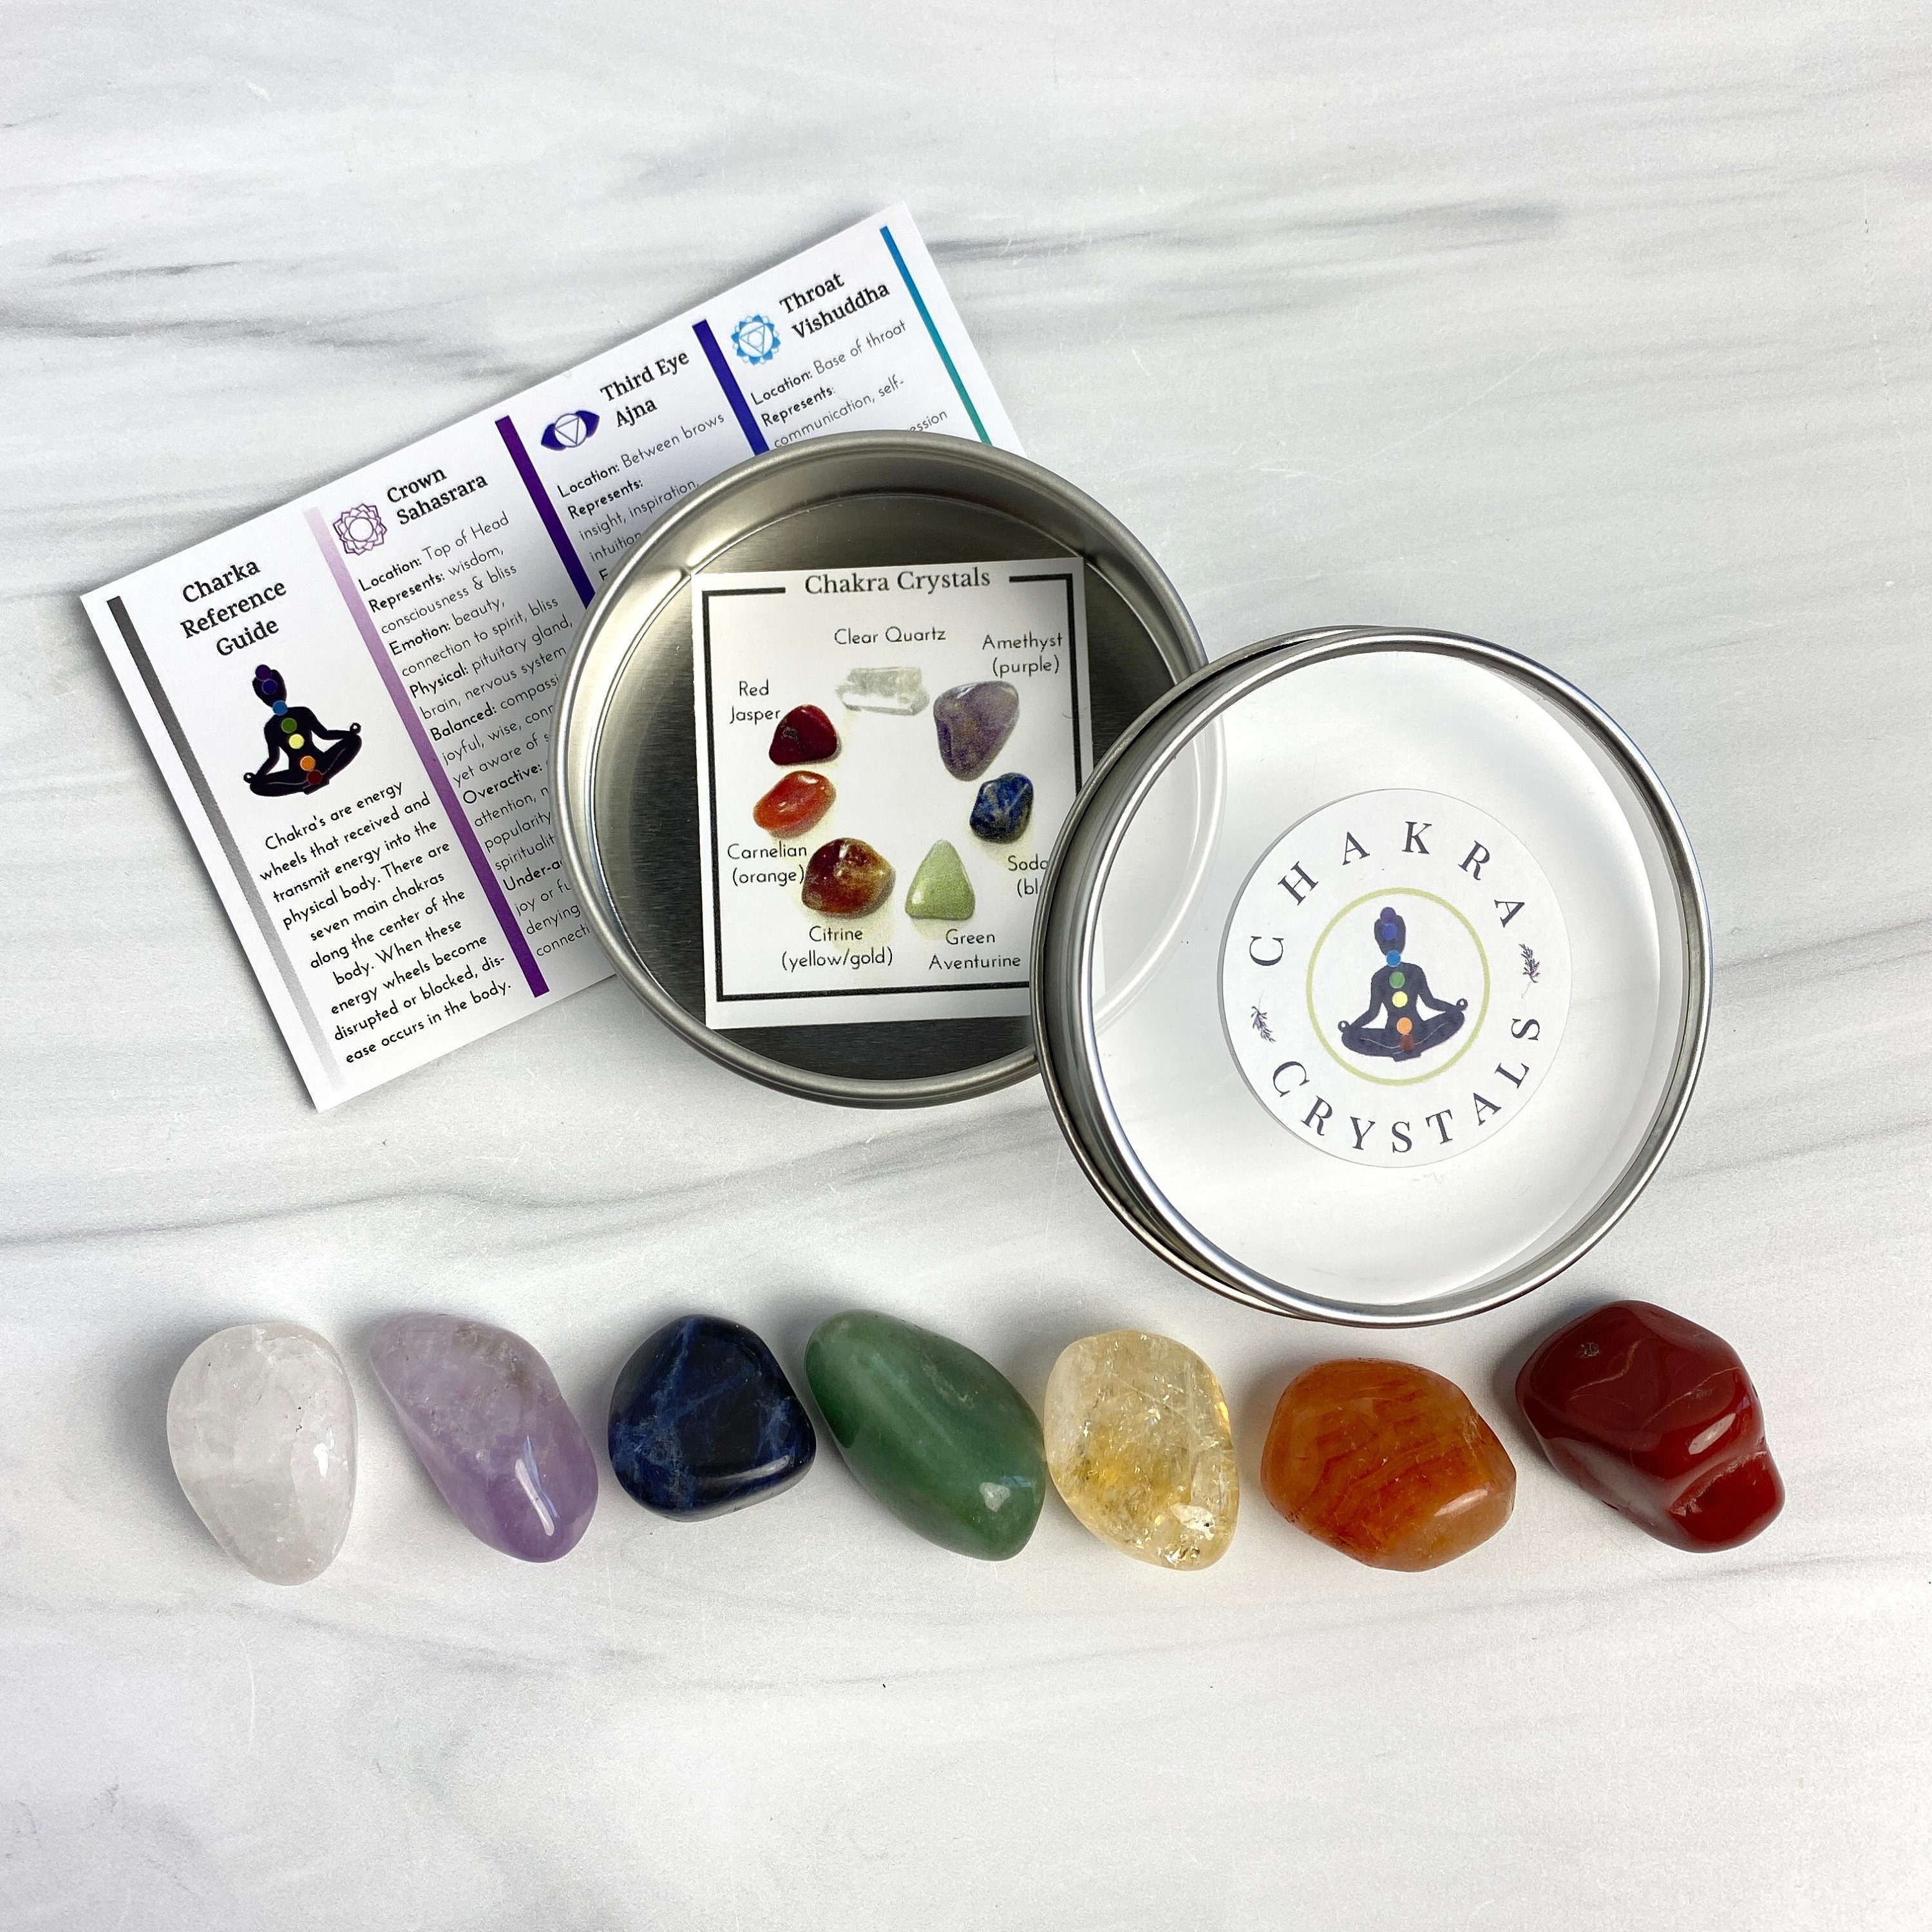 Chakra Crystals and Healing Stones Kit, 38 in 1 Real Crystals Set for  Beginners, Women Chakras Balance Gemstones and Crystals for Meditation,  Crystal